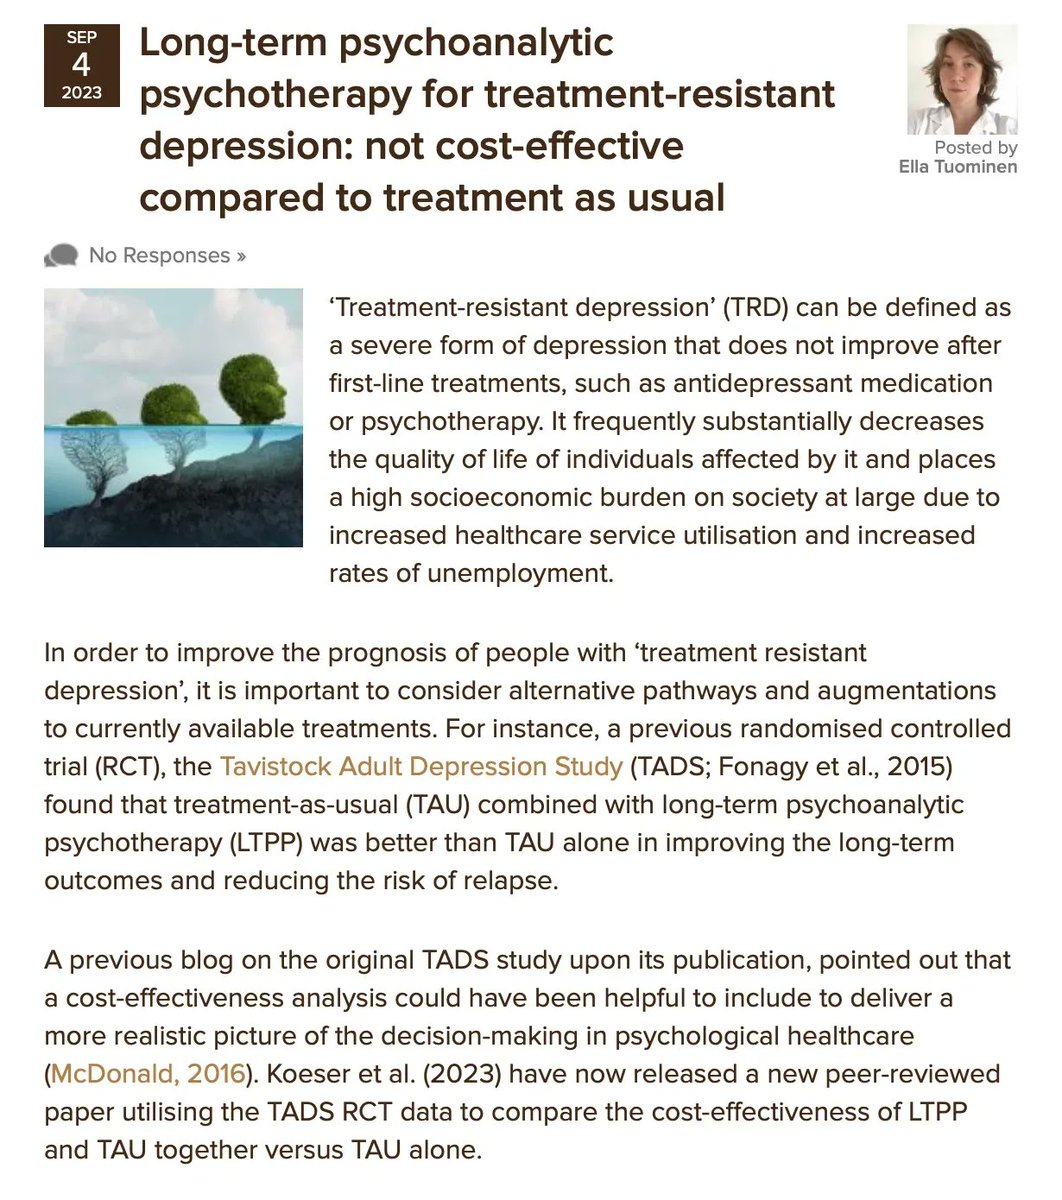 Today @EllaWTuominen considers the Tavistock Adult Depression Study by @PeterFonagy, @Knappem, @mccrone_paul et al @TaviPortPubs, which evaluated the cost-effectiveness of long-term psychoanalytic psychotherapy for treatment resistant depression nationalelfservice.net/?p=174689